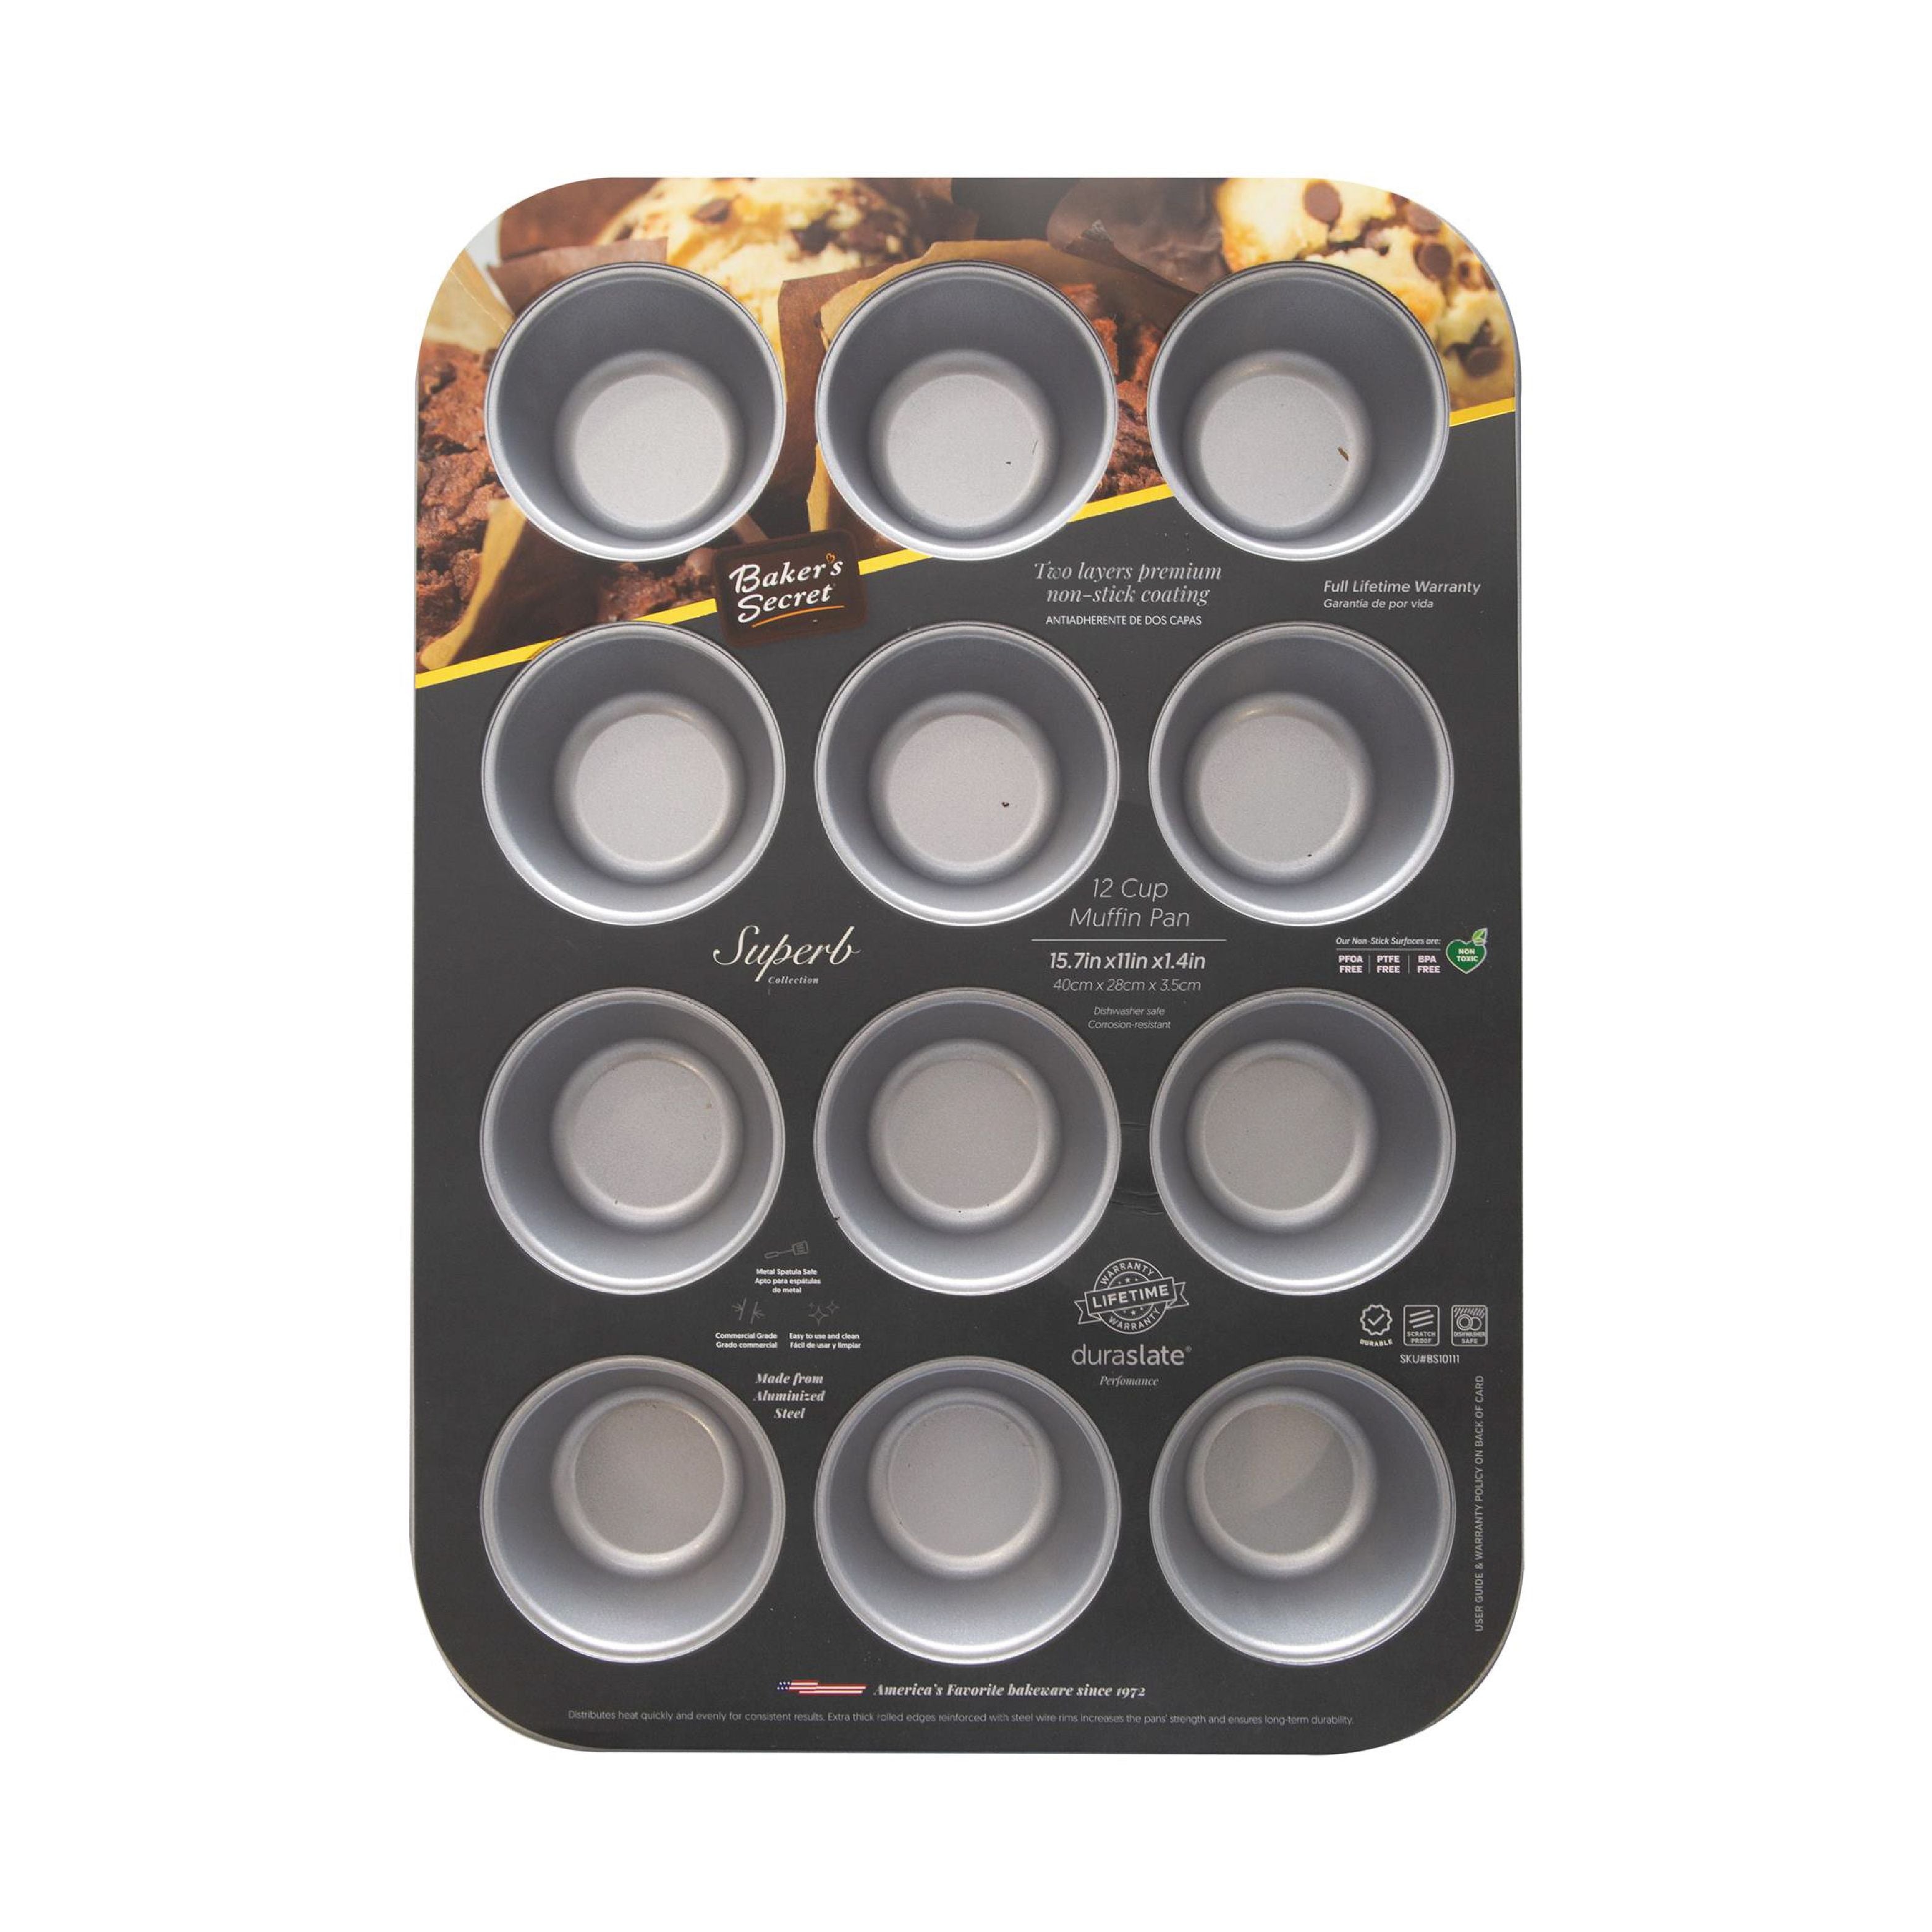 Twin Towers Trading 12 Cup Non-Stick Silicone Muffin Pan with Lid